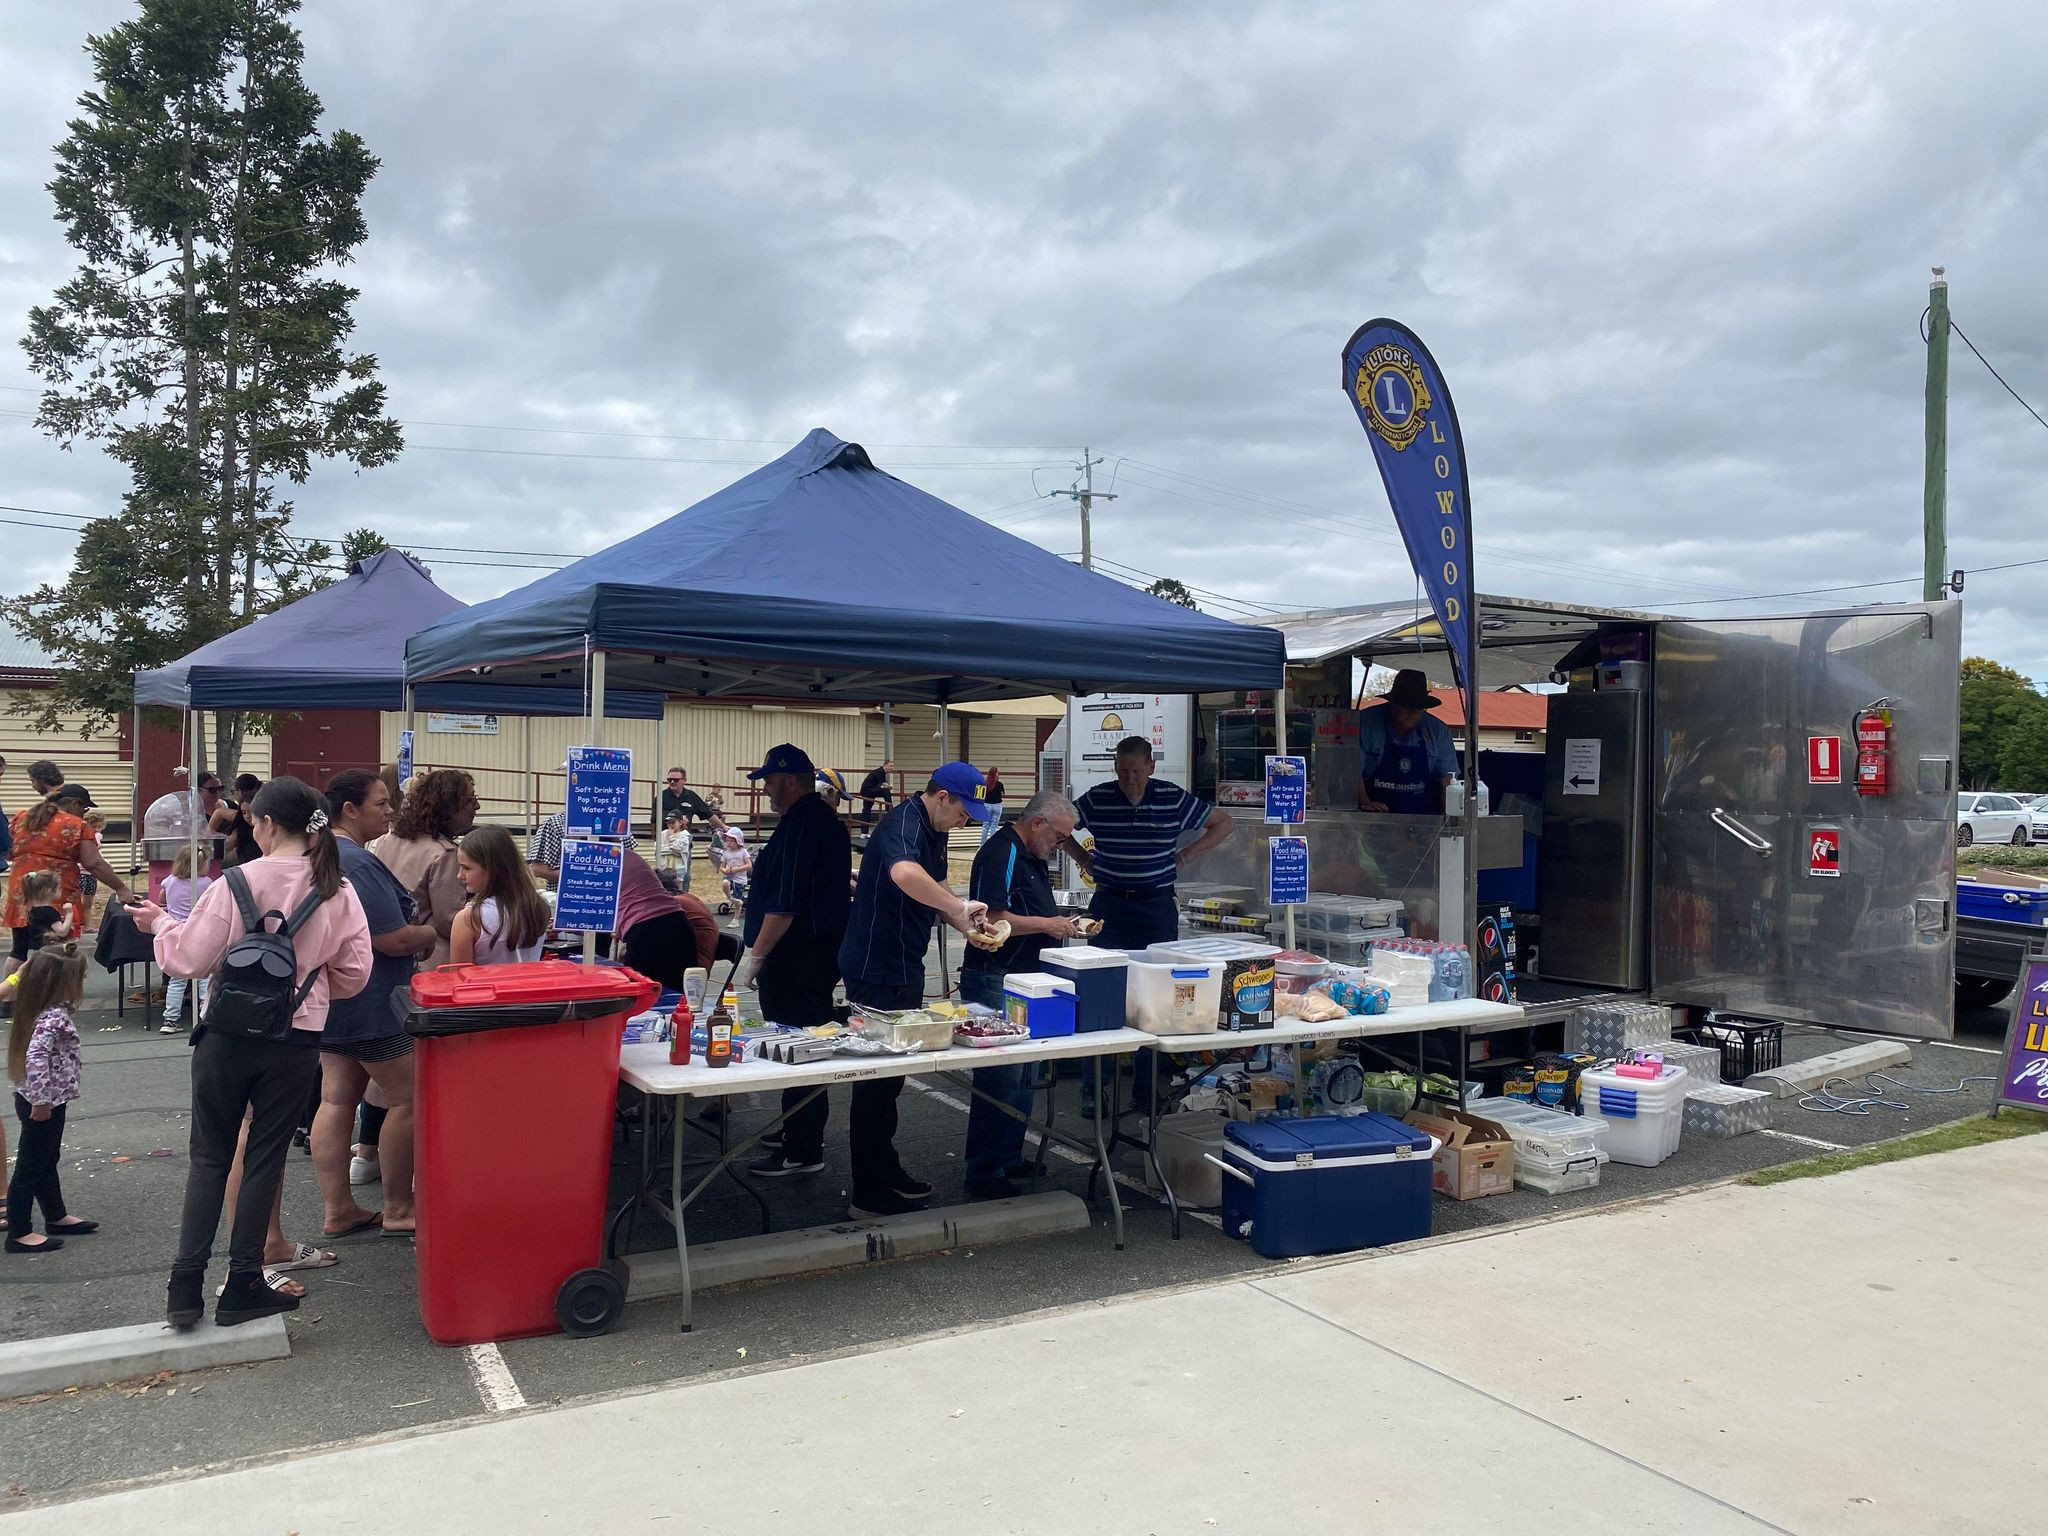 The Lowood Lions were busy all day at the food stall.